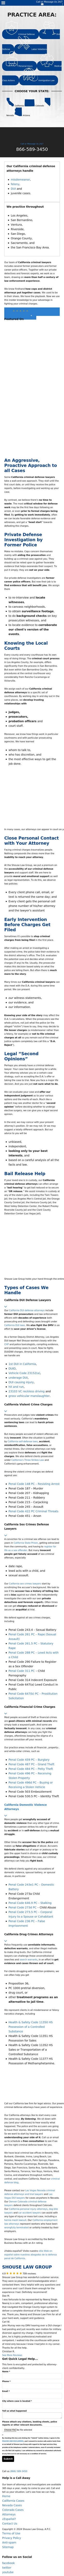 Shouse Law Group - Plam Springs CA Lawyers